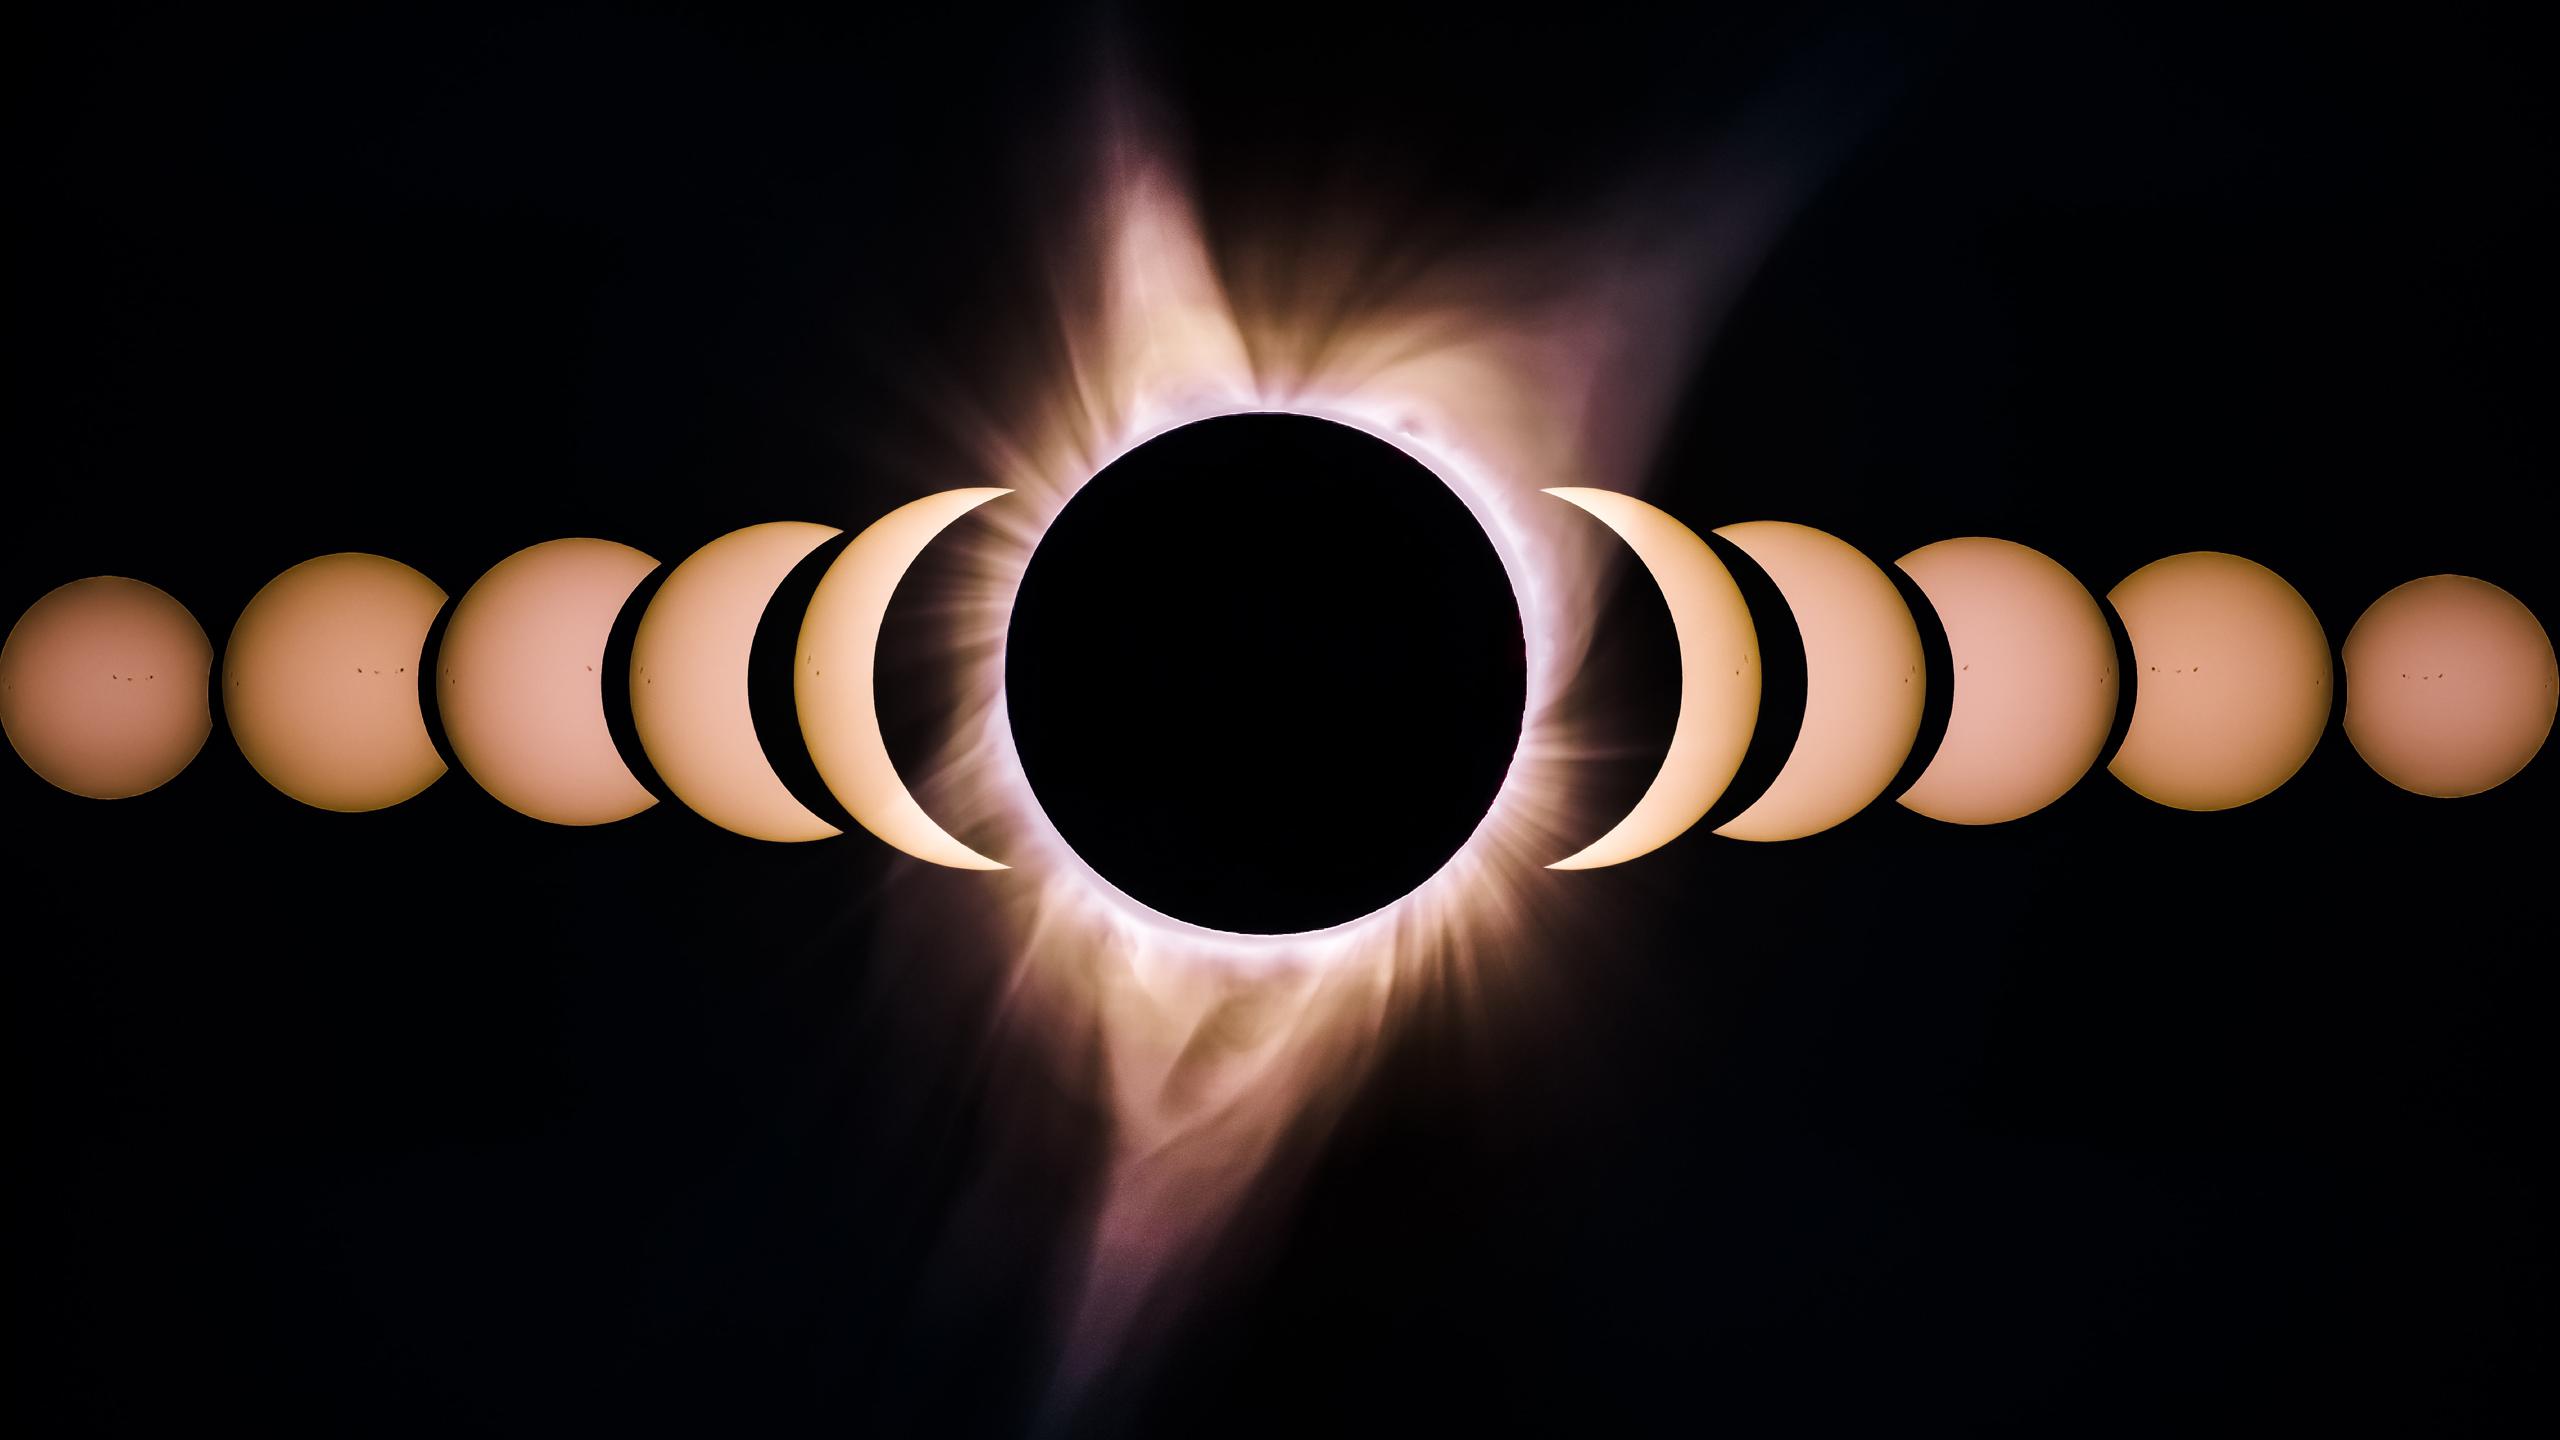 eclipse-4k-wallpapers-for-your-desktop-or-mobile-screen-free-and-easy